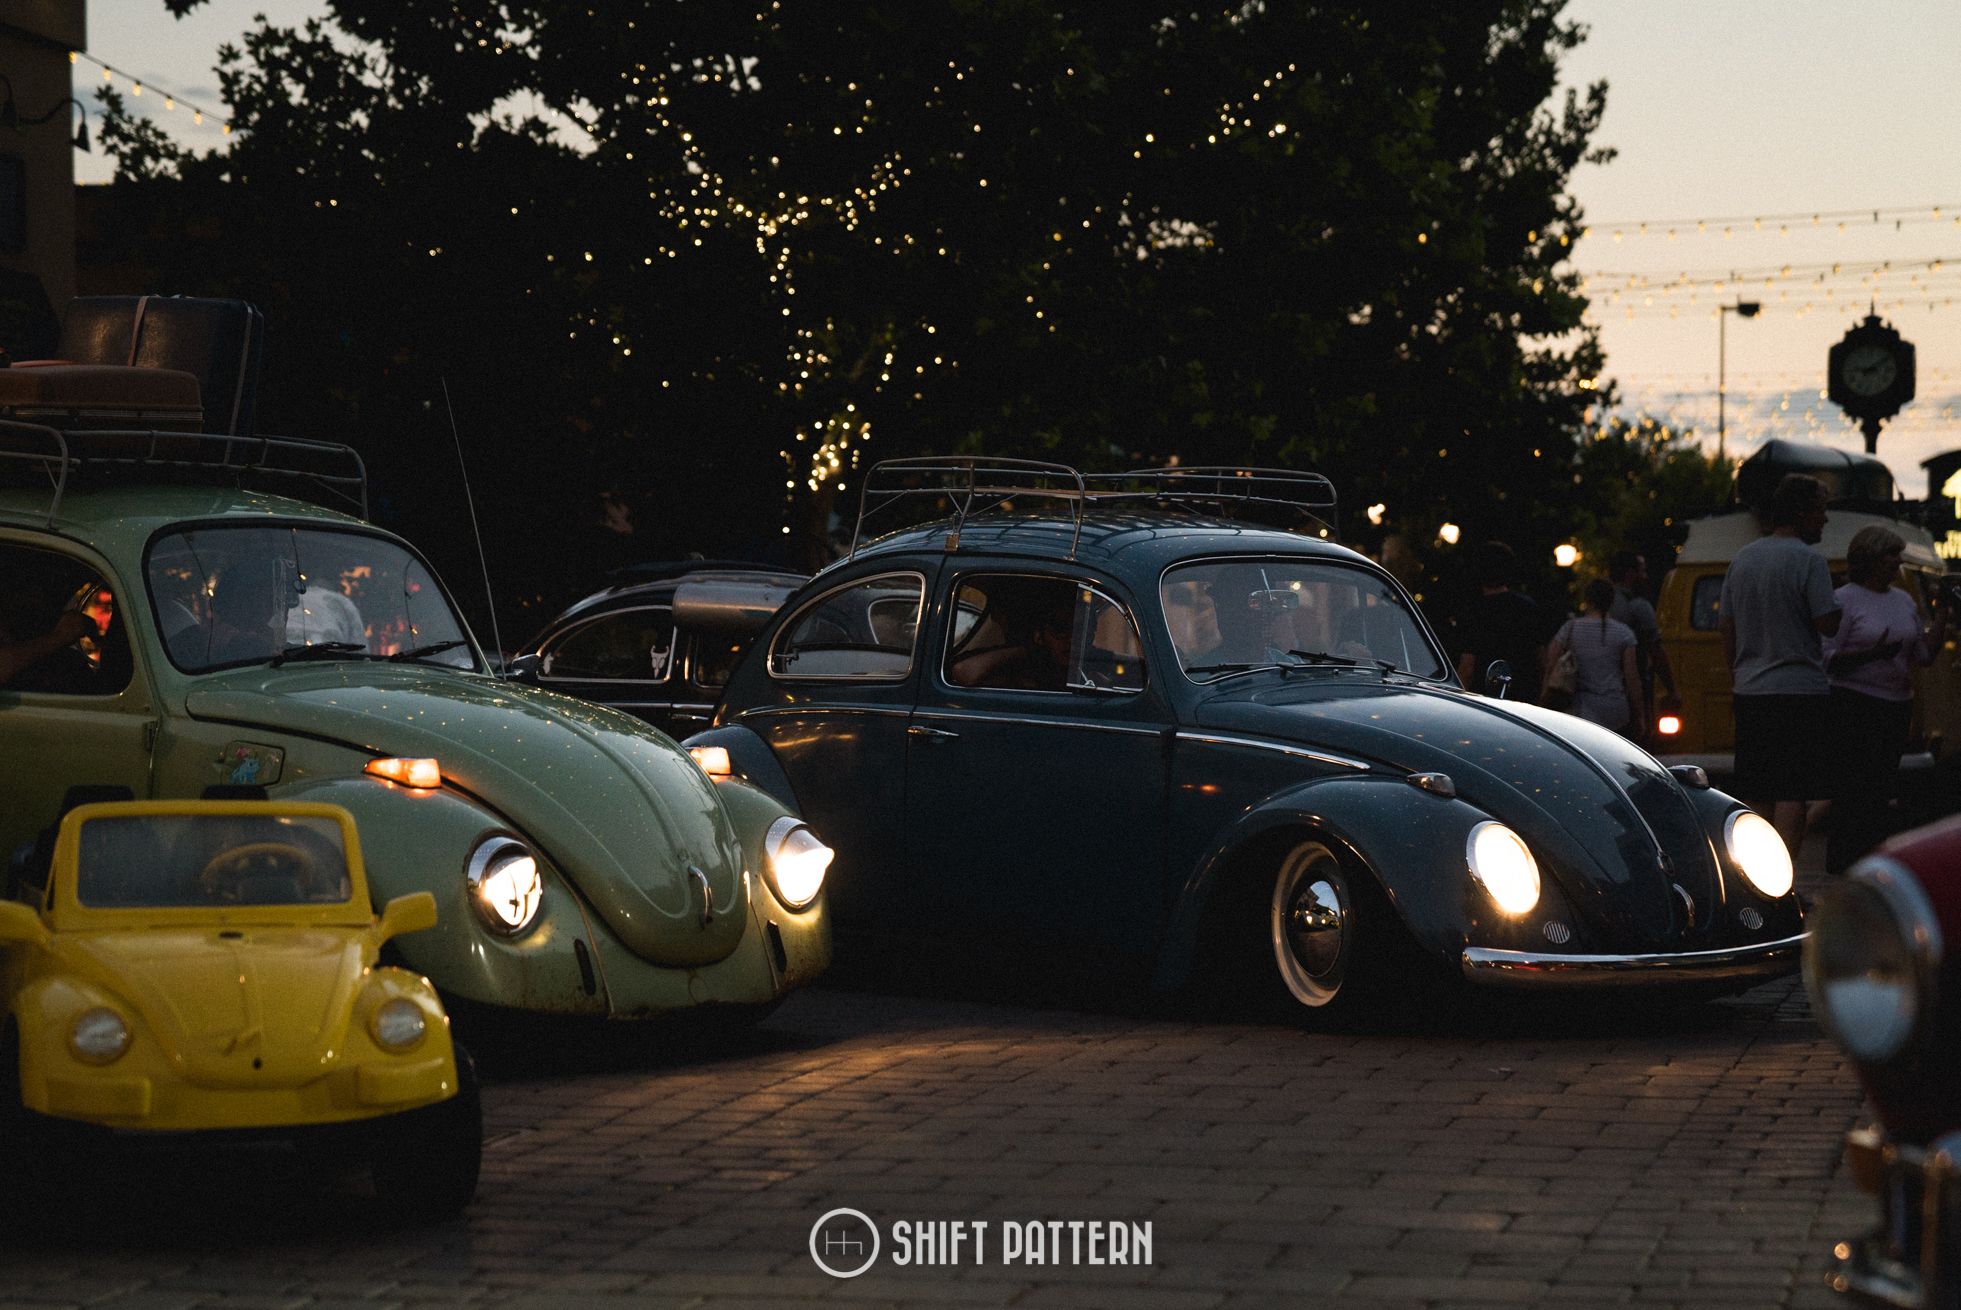 Wasatch Classic VW - 2017